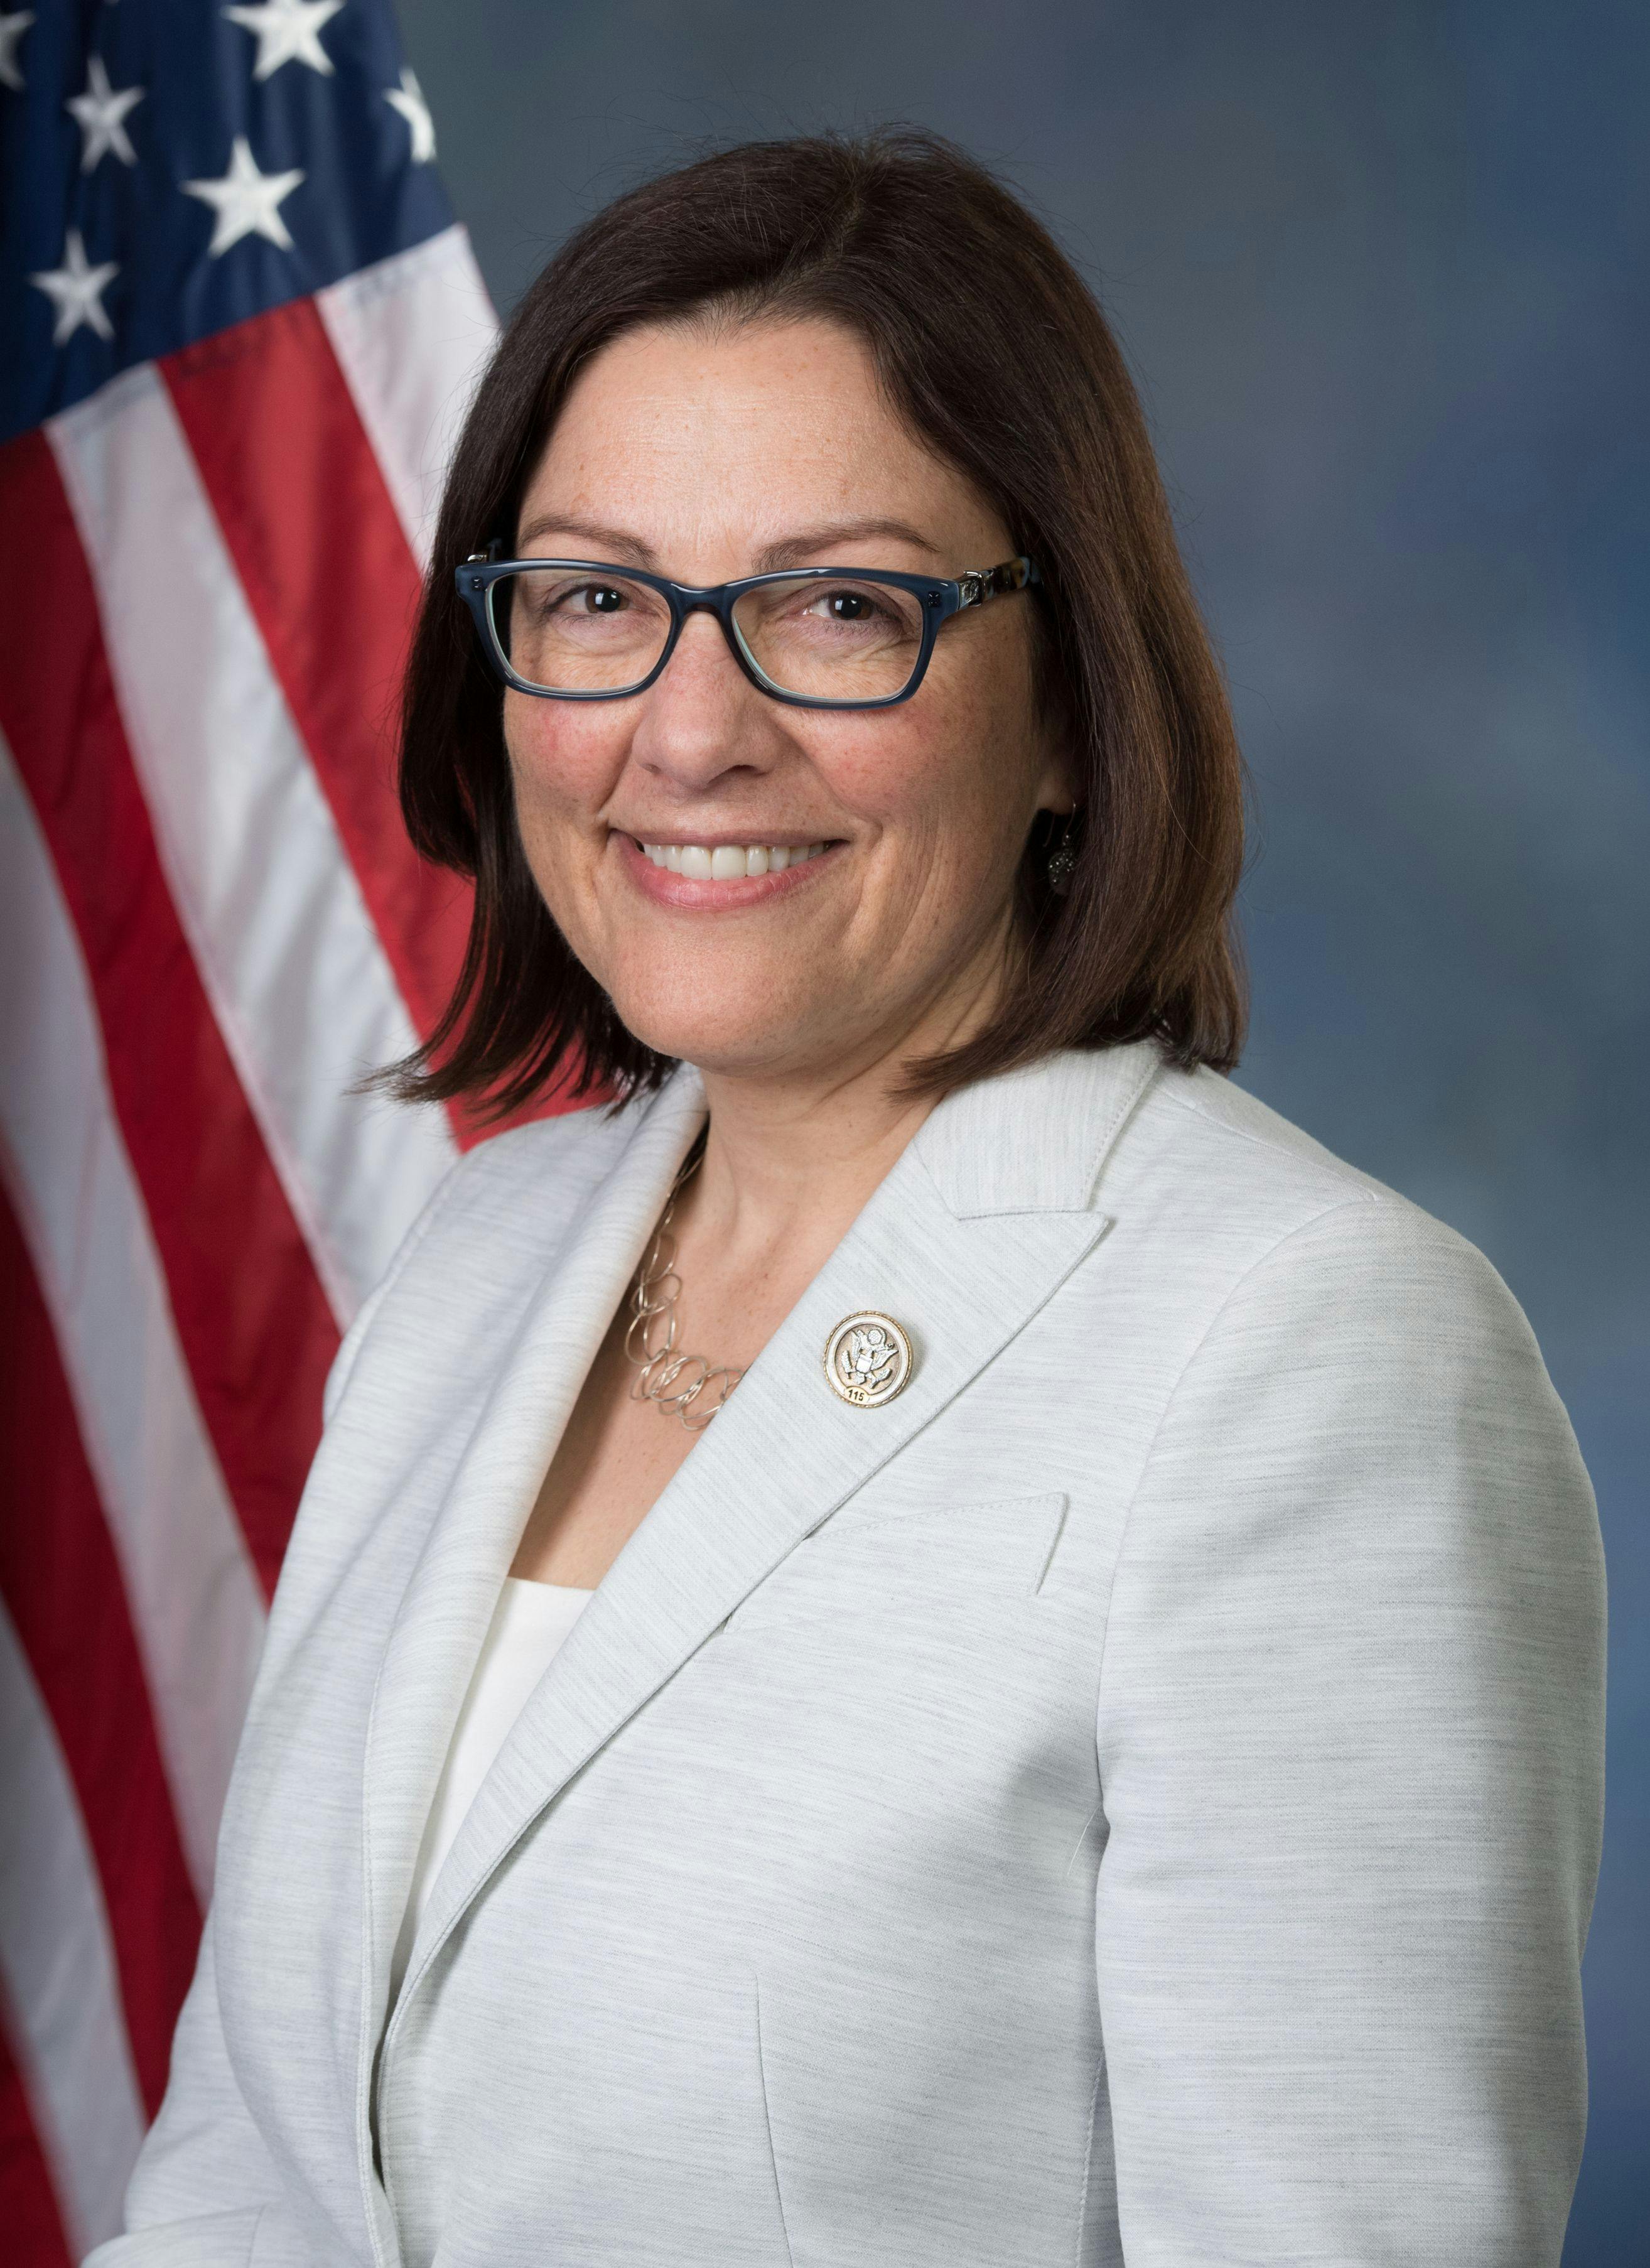 Representative Suzan DelBene (D, Oregon) is a cosponsor of the Value in Health Care Act, which could create new incentives to adopt value-based care.